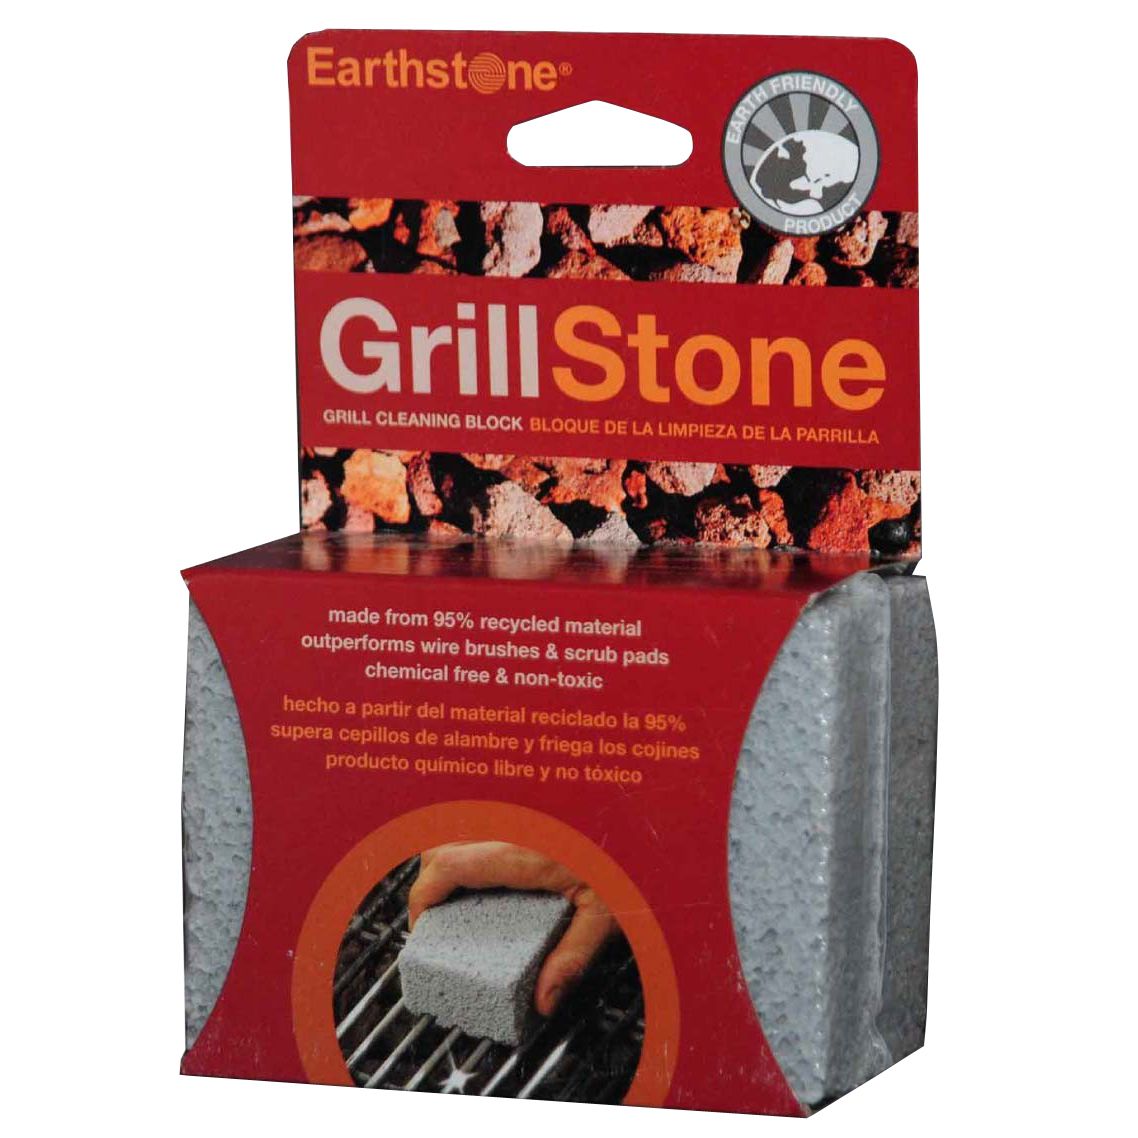 Earthstone Grill Stone Cleaning Block